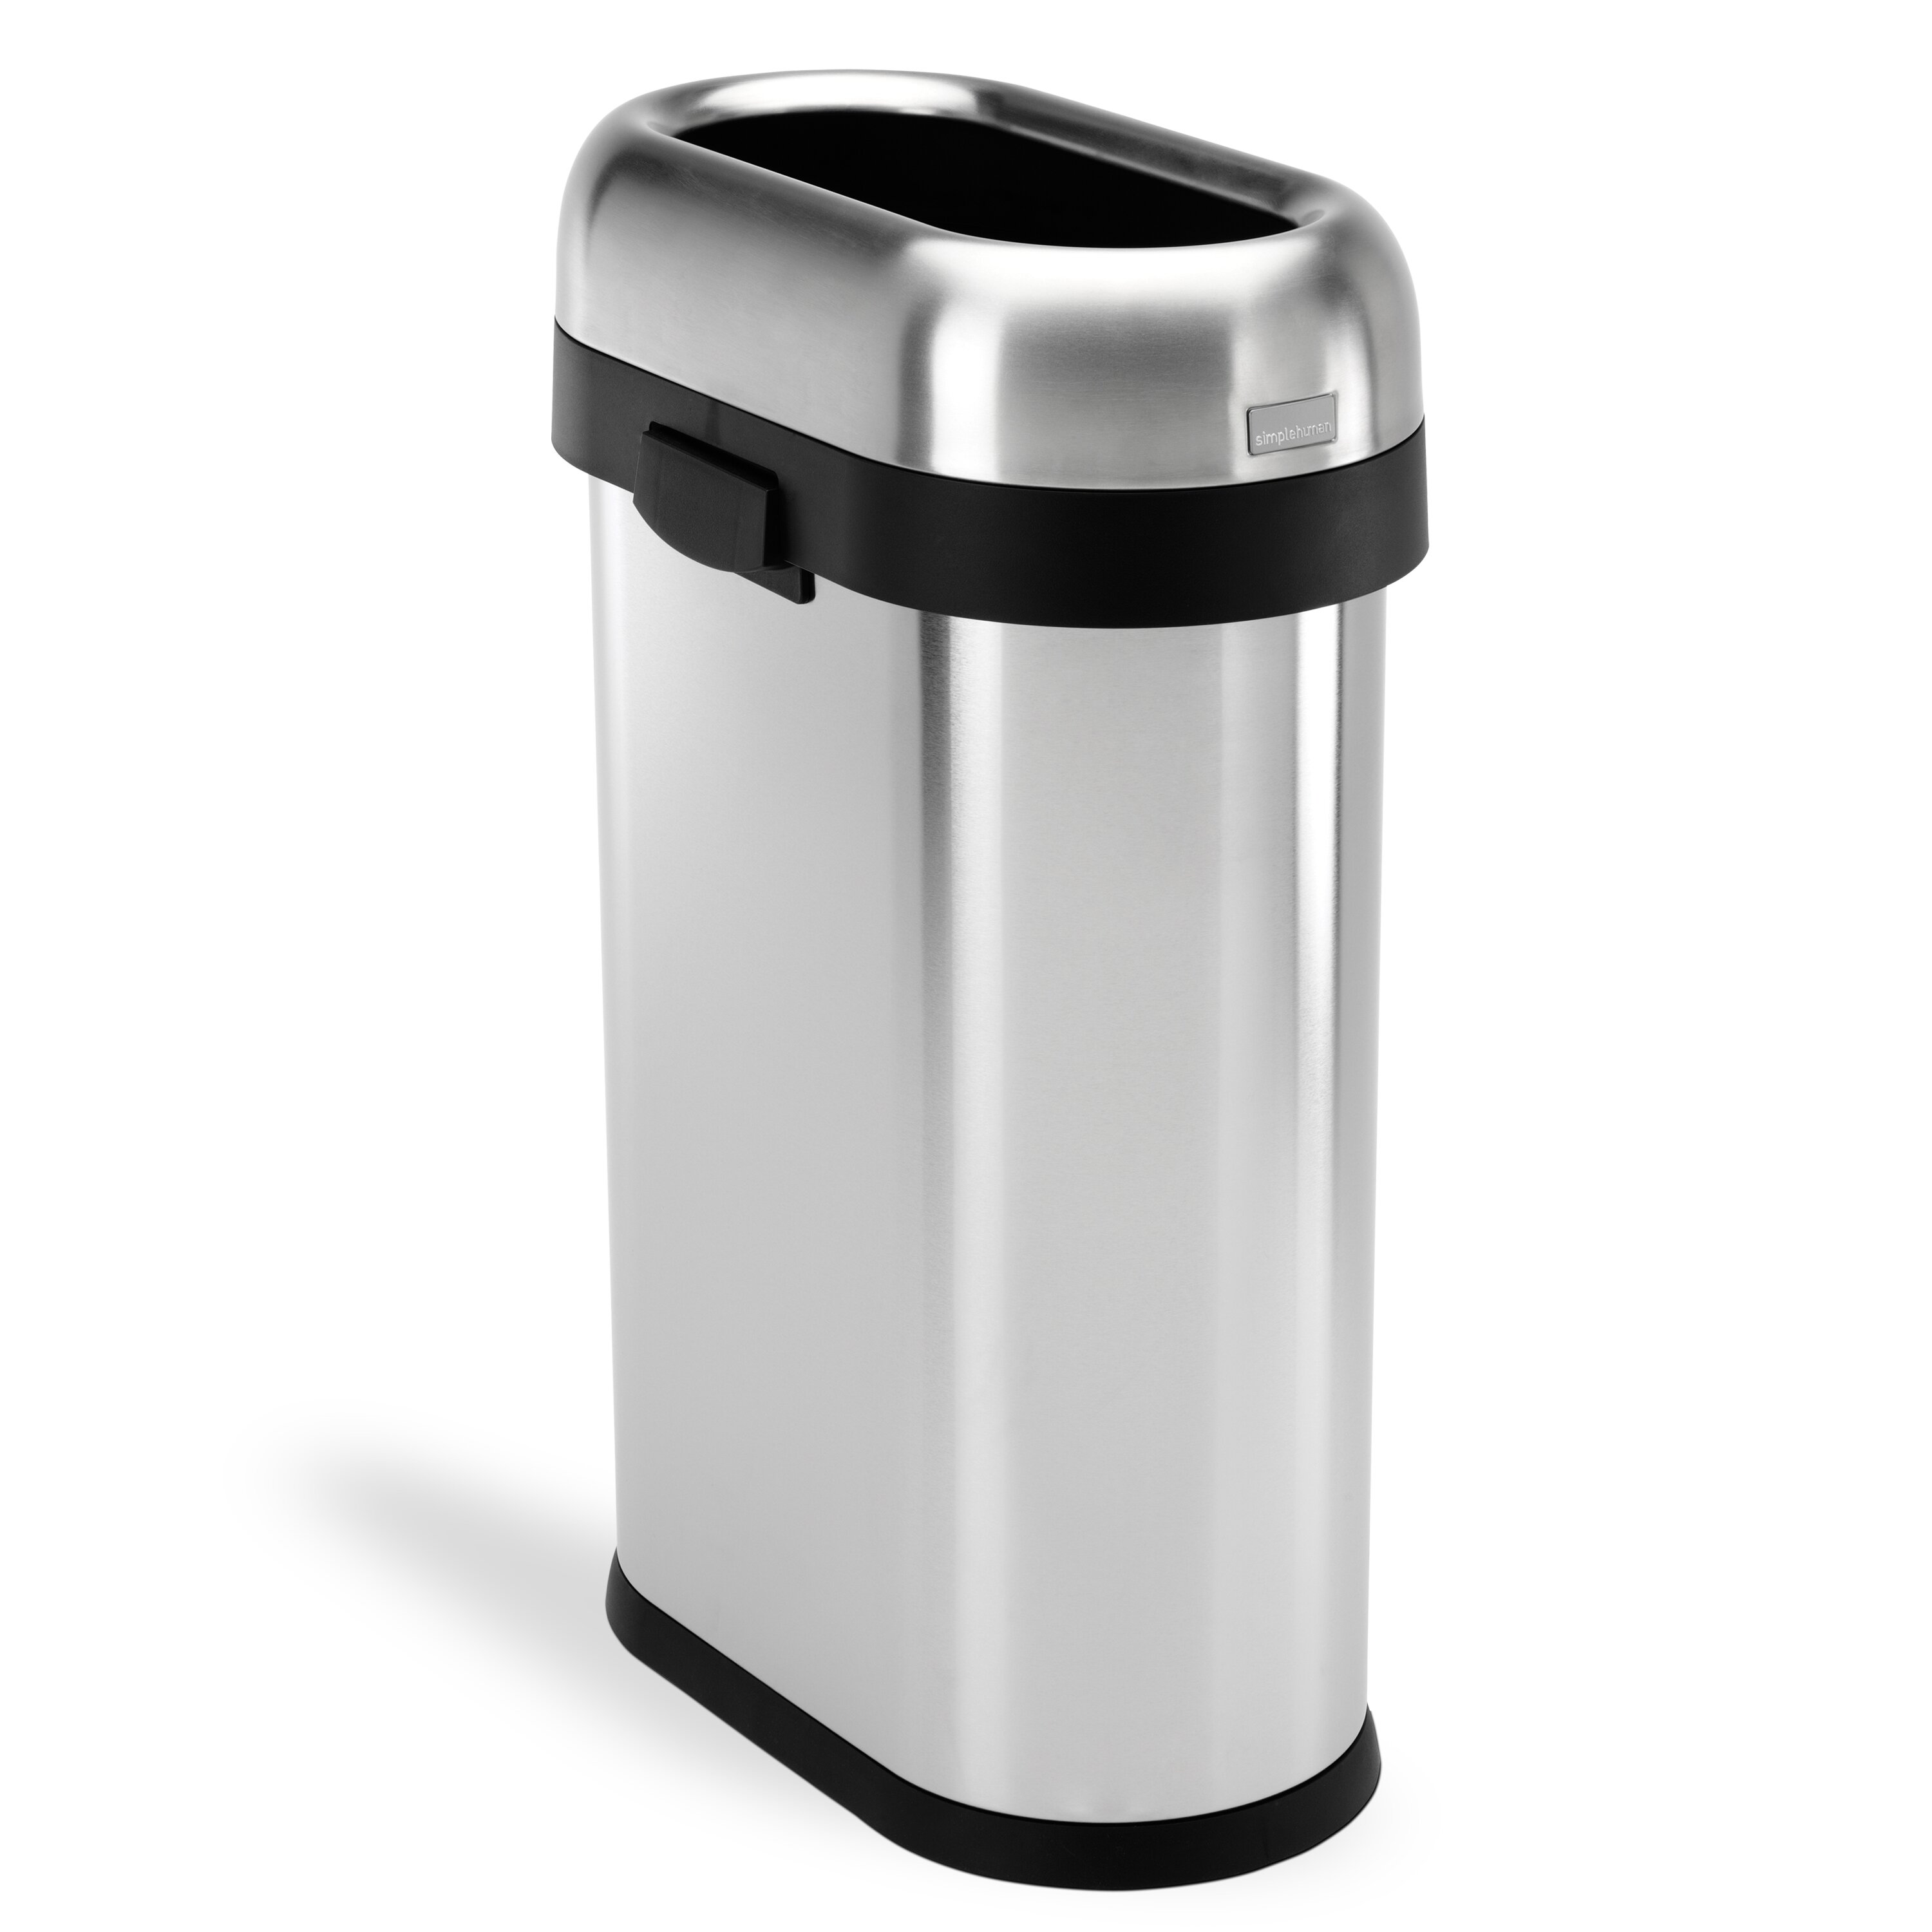 Metal Lids, Commercial Garbage Cans